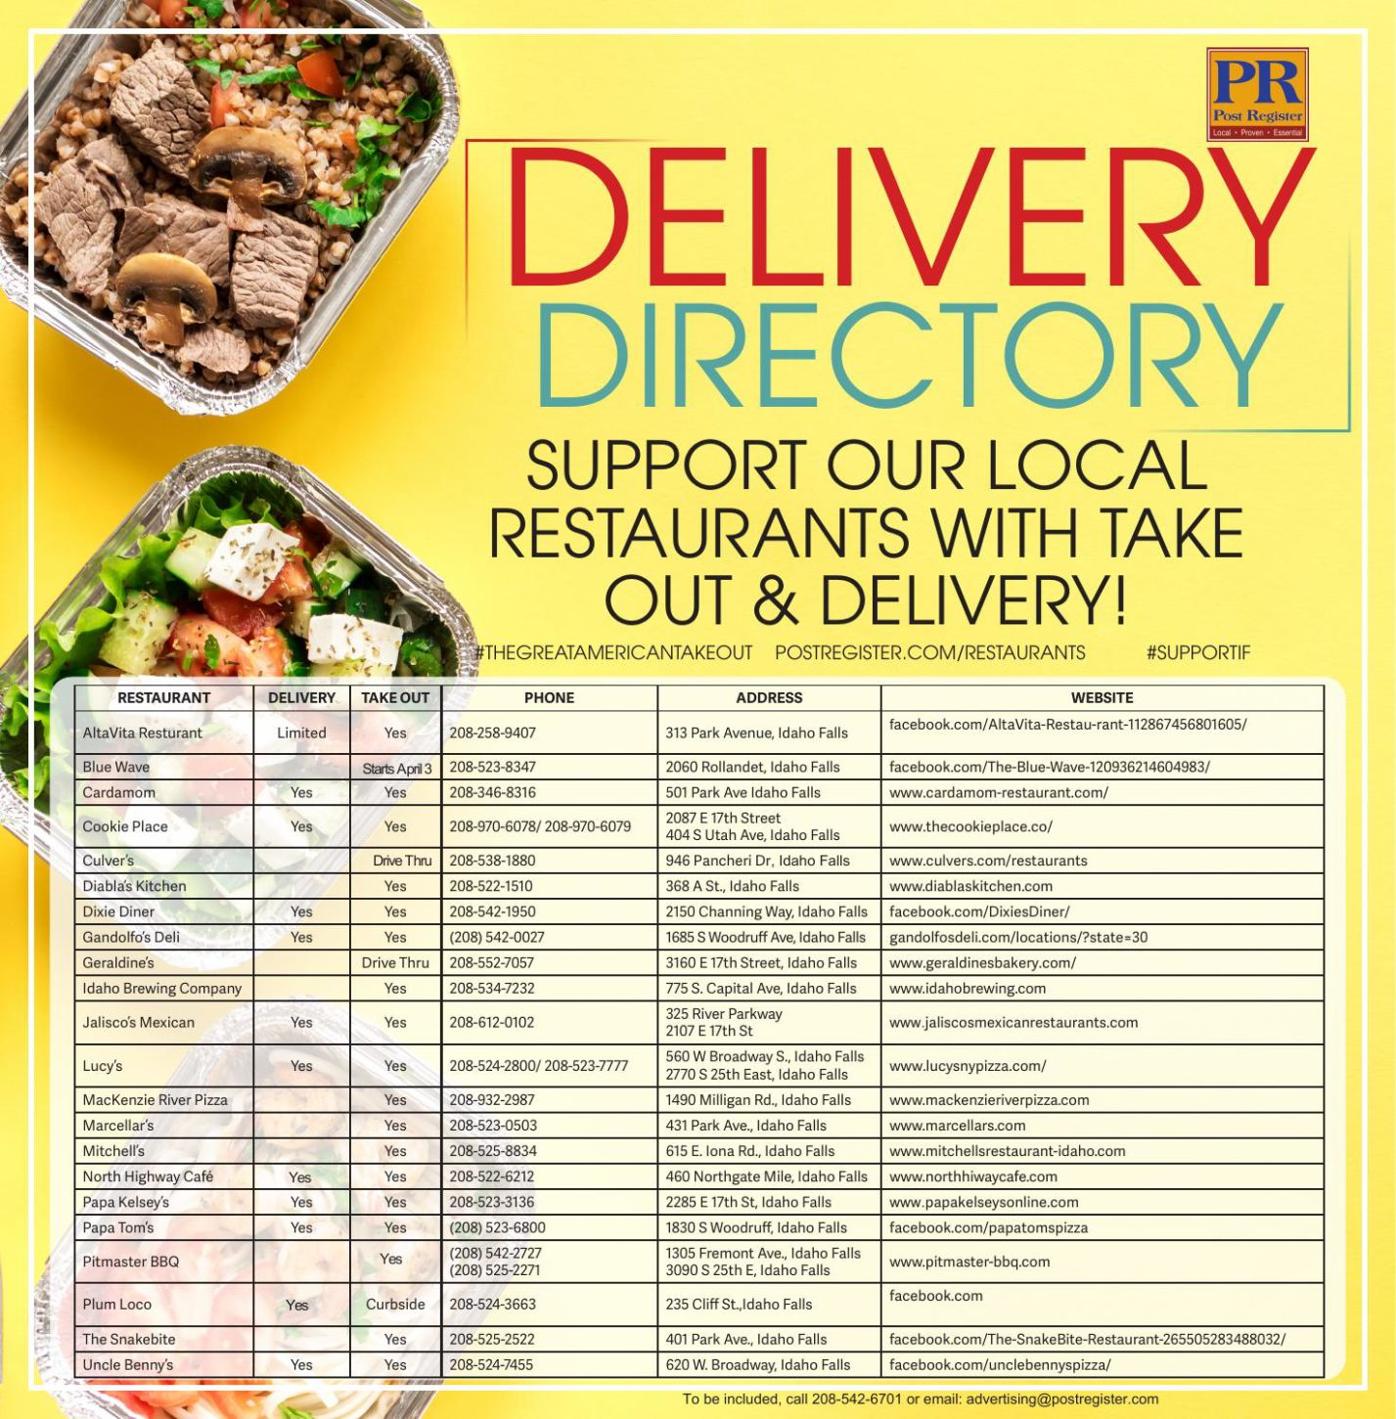 DELIVERY DIRECTORY